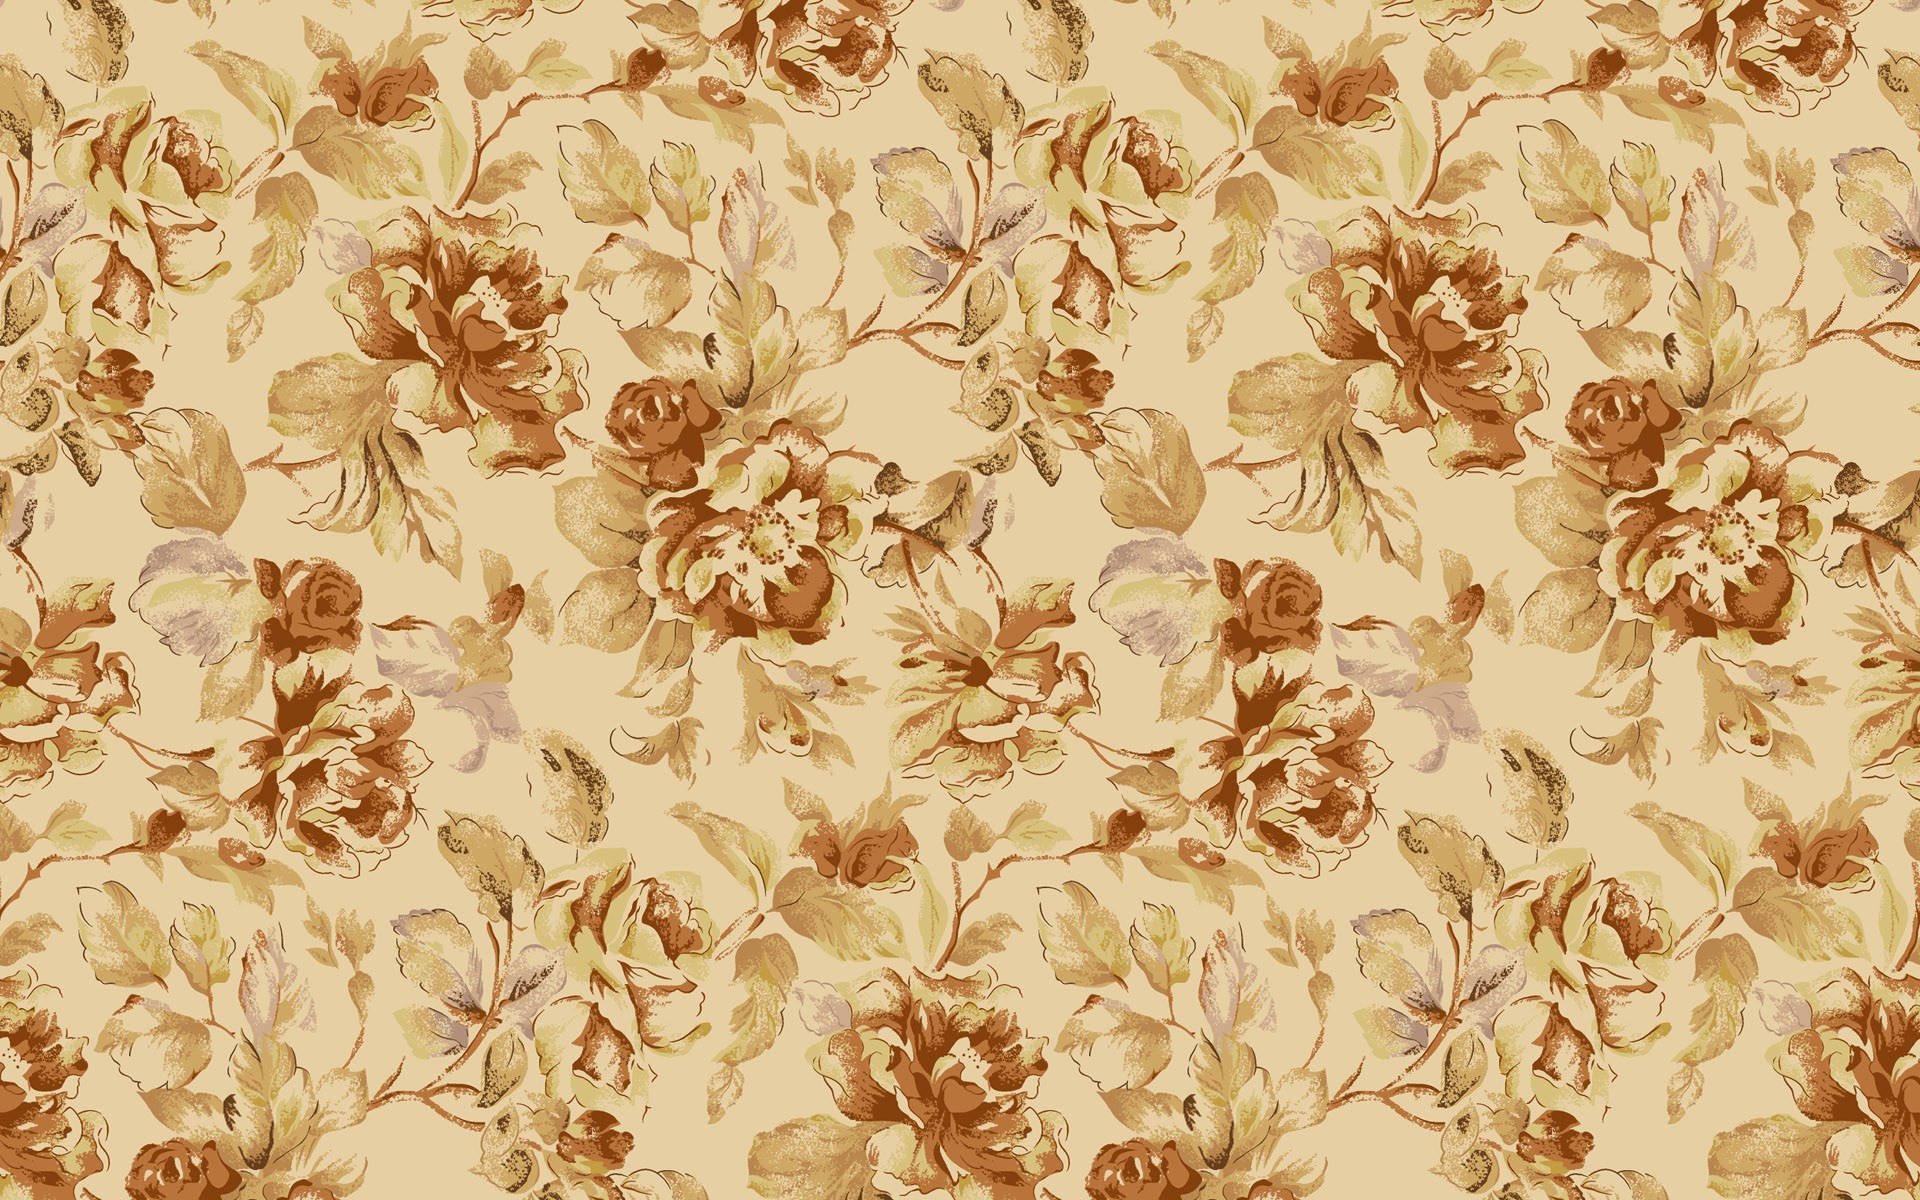 How does the Free Floral Vintage Wallpaper come in handy